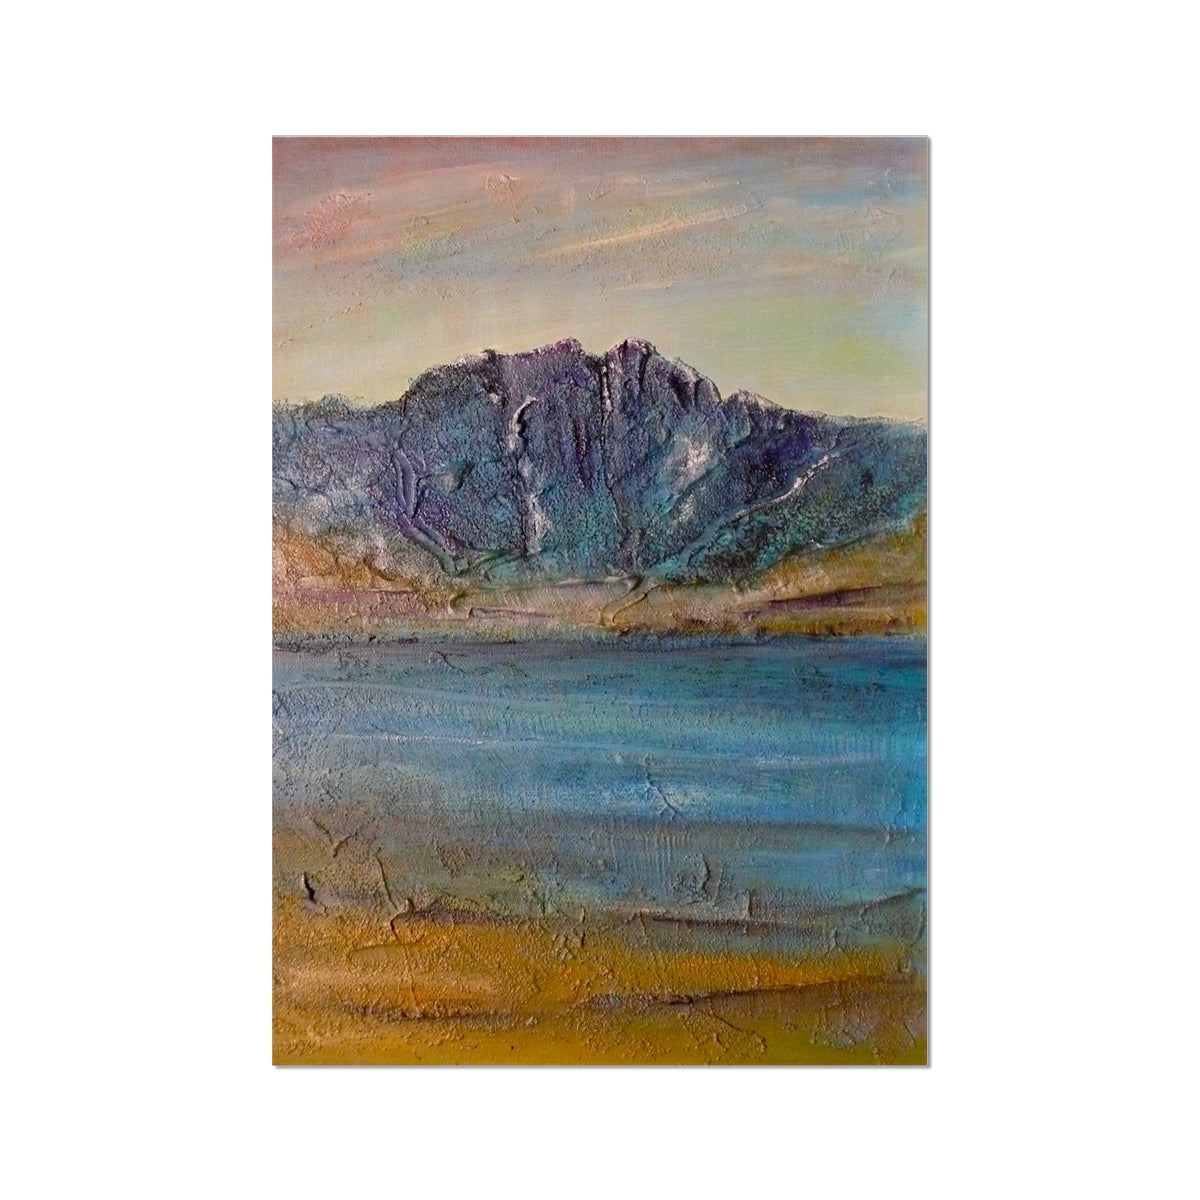 Torridon Painting | Fine Art Prints From Scotland-Unframed Prints-Scottish Lochs & Mountains Art Gallery-A2 Portrait-Paintings, Prints, Homeware, Art Gifts From Scotland By Scottish Artist Kevin Hunter